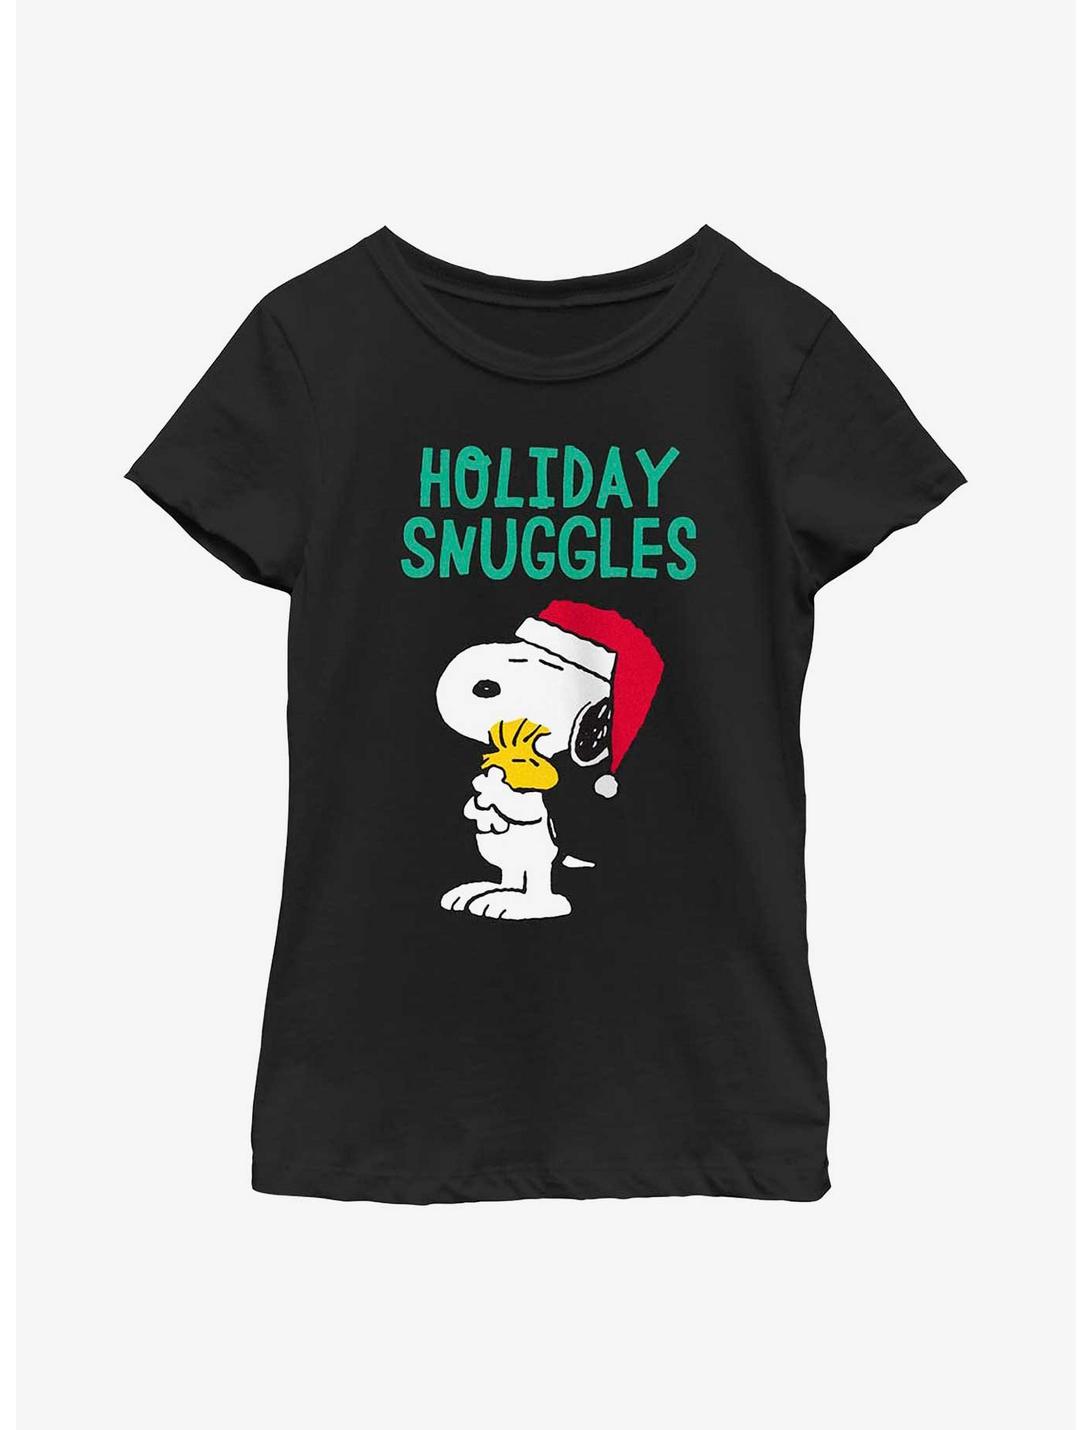 Peanuts Snoopy and Woodstock Holiday Snuggles Youth Girls T-Shirt, BLACK, hi-res